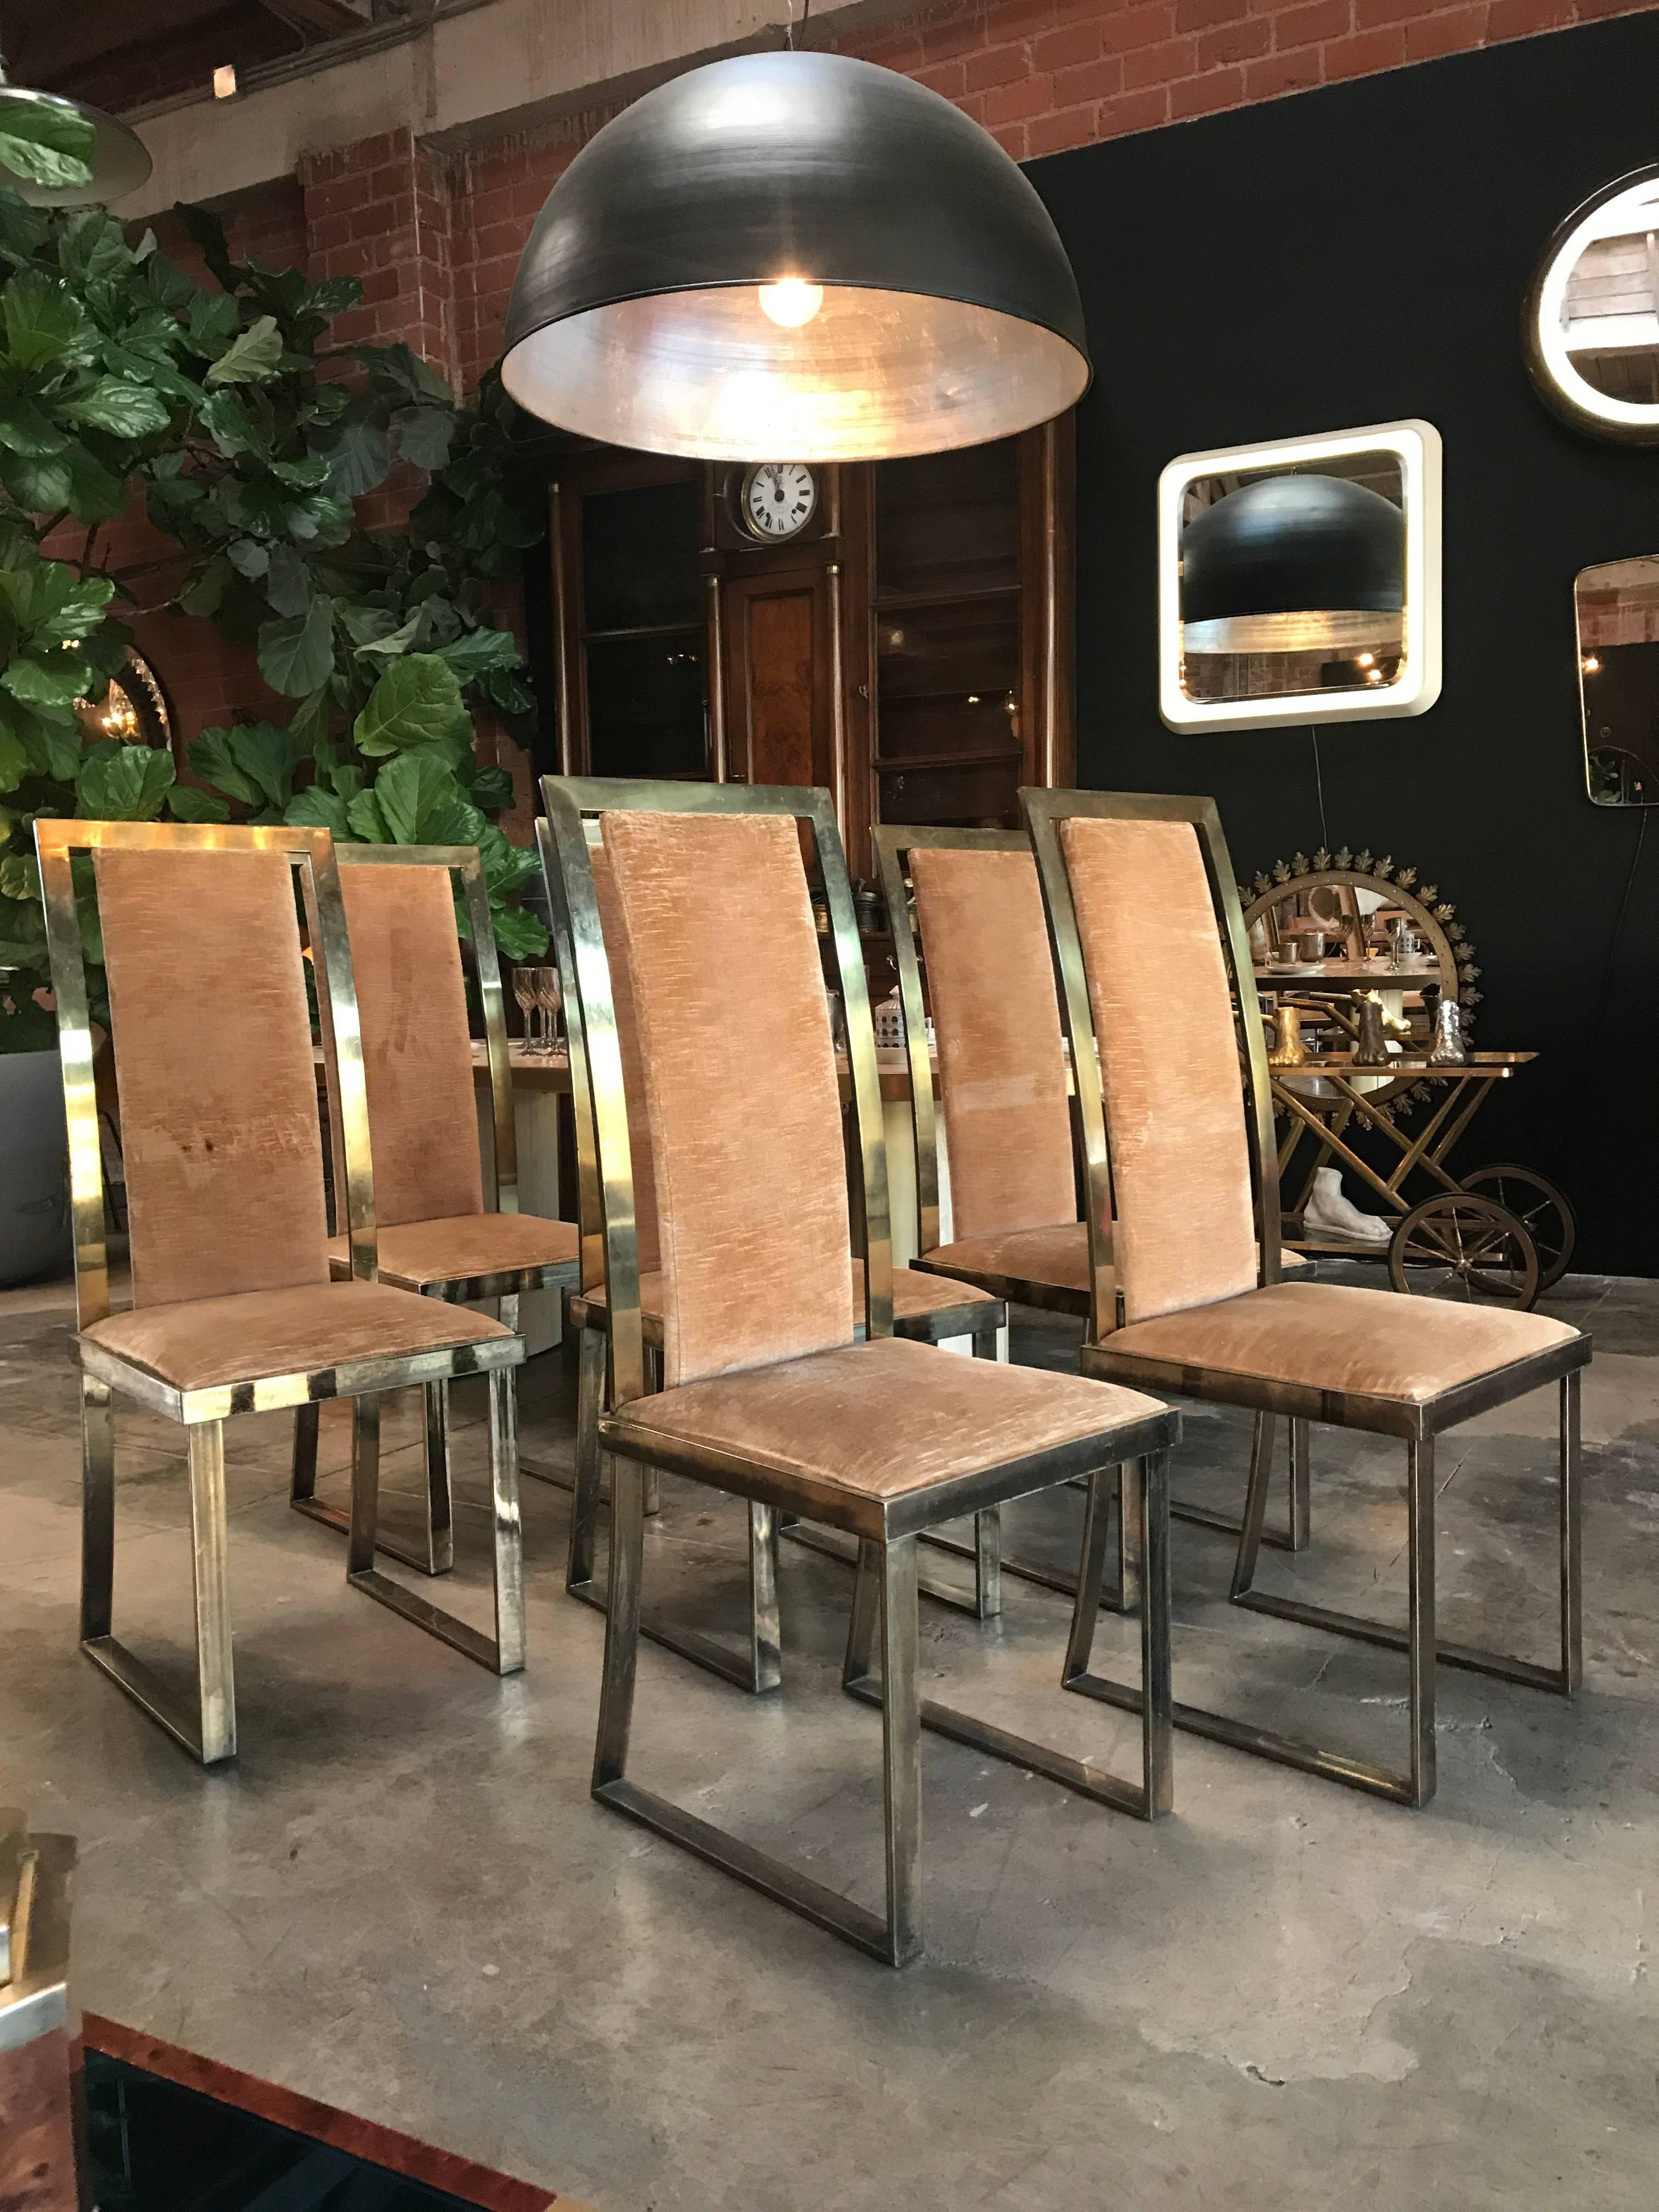 1960s, sassy seating from Italia to your dining room.
Massive brass set of four.